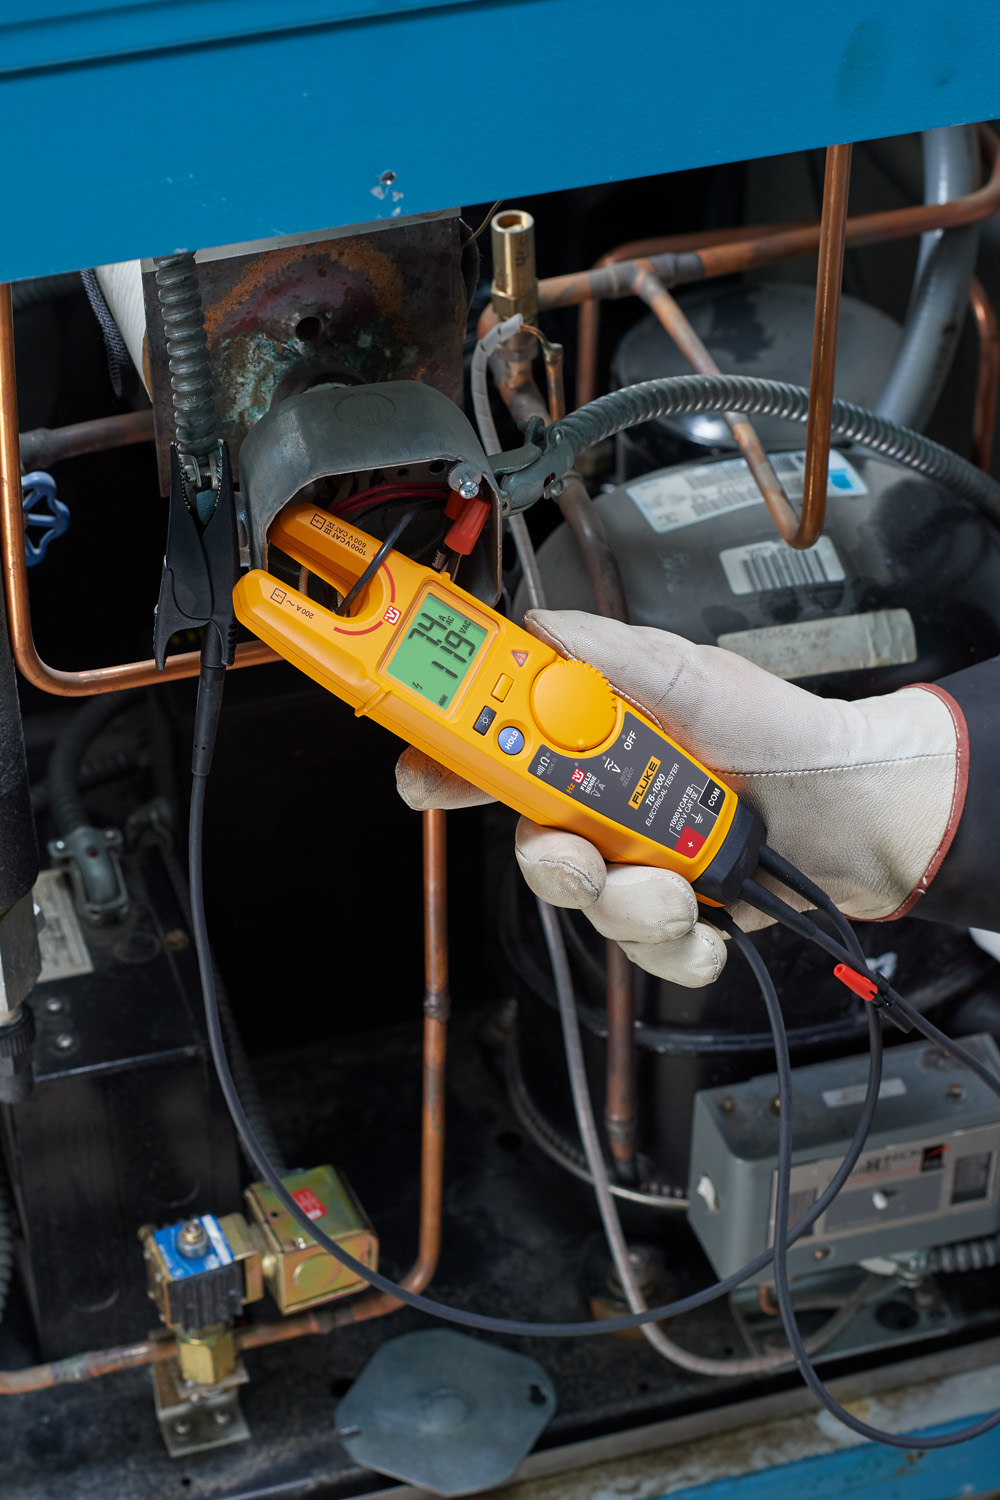 Fluke T6 Electircal tester Measure voltage…without test leads